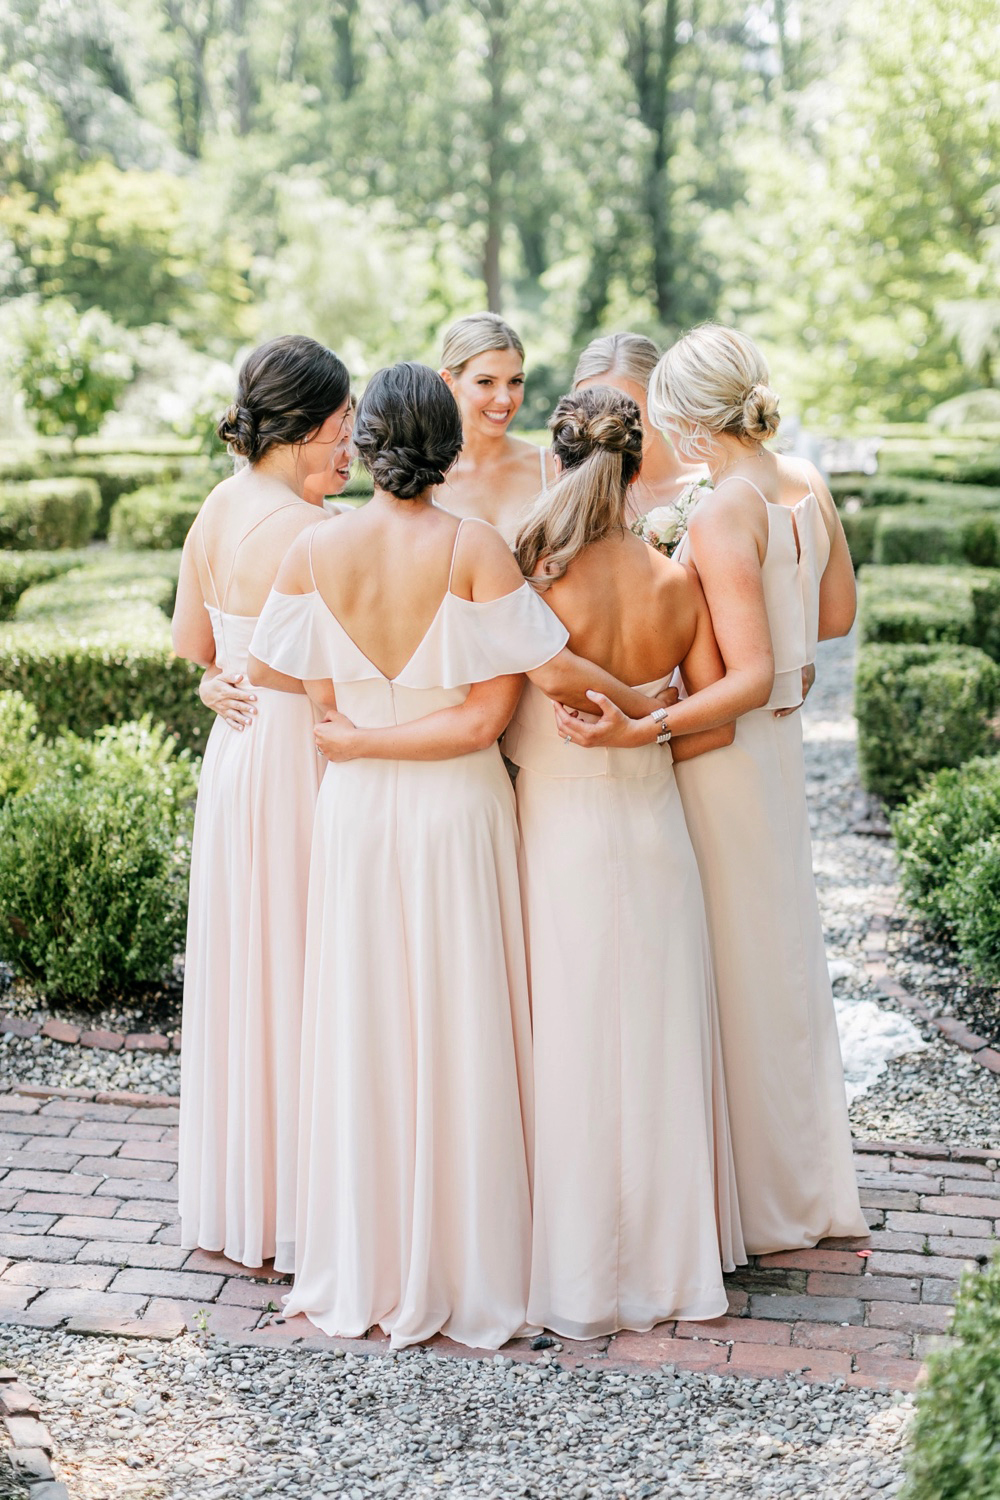 32 SneakPeek 079 Fine Art Wedding Photography Philadelphia Wedding Photography Pennsylvania Wedding Photographer Emily Wren Photography Light And Airy